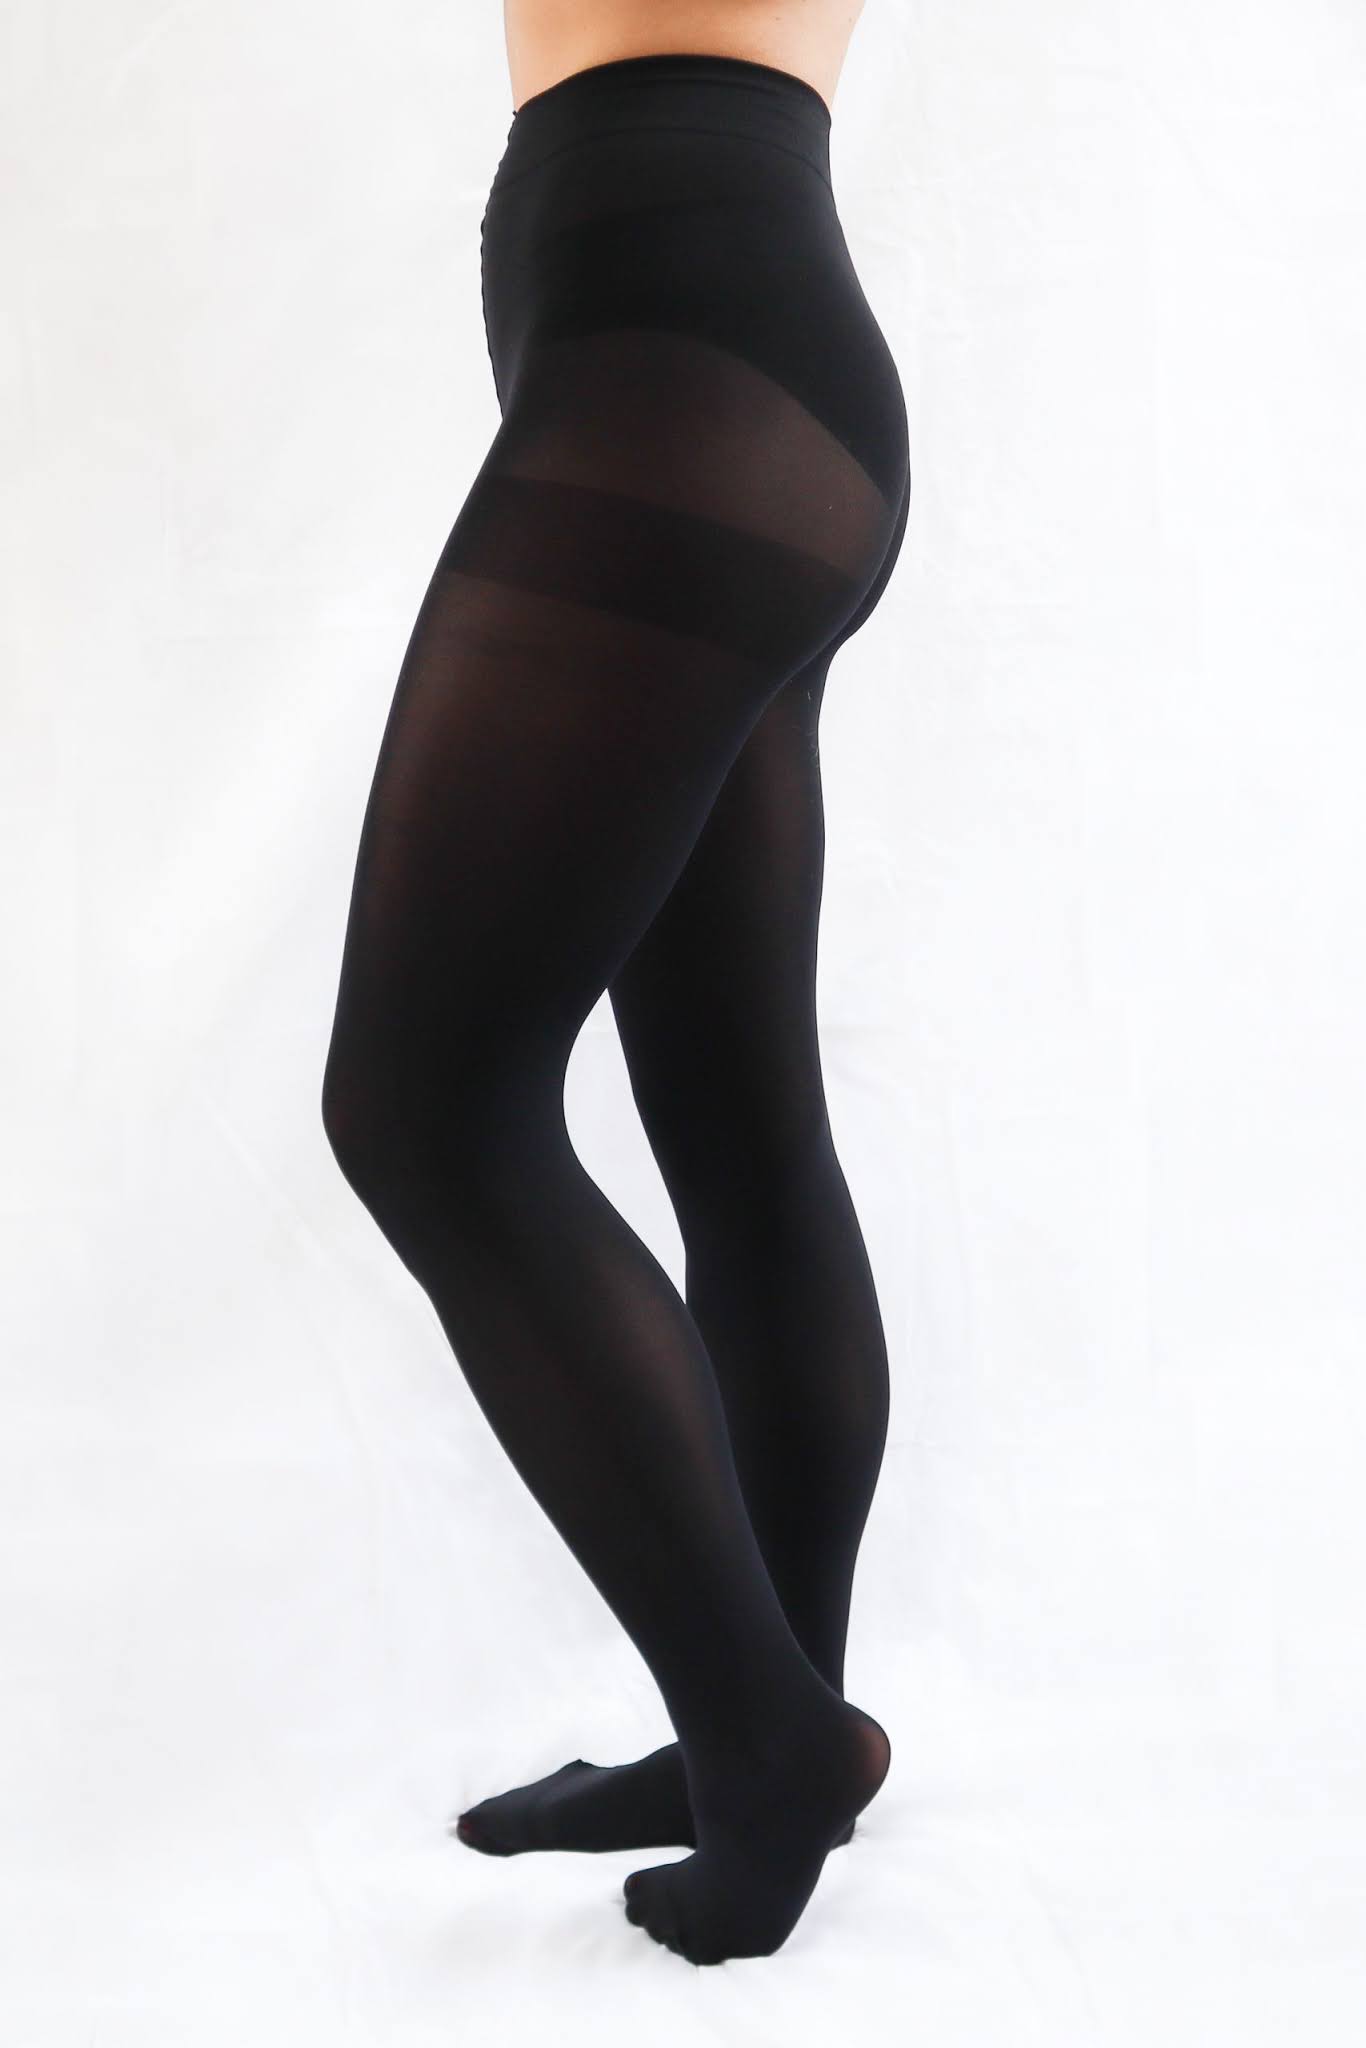 Hosiery For Men: Reviewed: 80 Denier Recycled Opaque Tights From